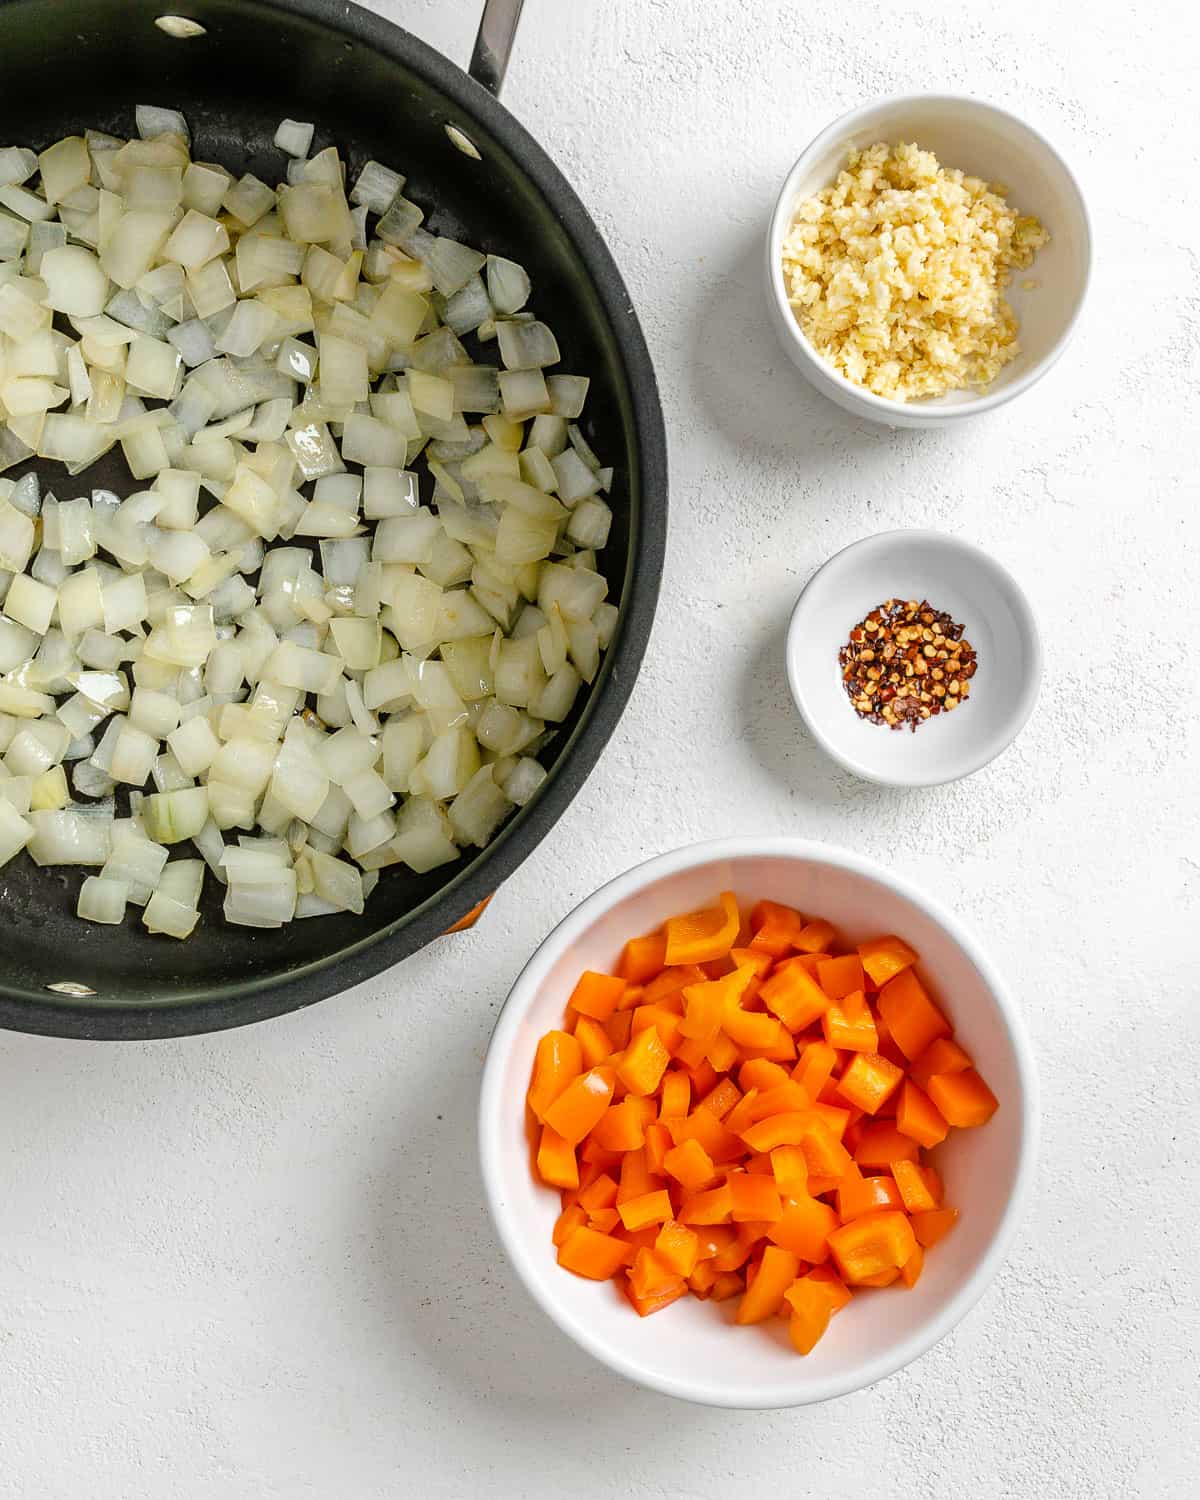 onions in a black pan alongside small bowls of veggies against a white surface